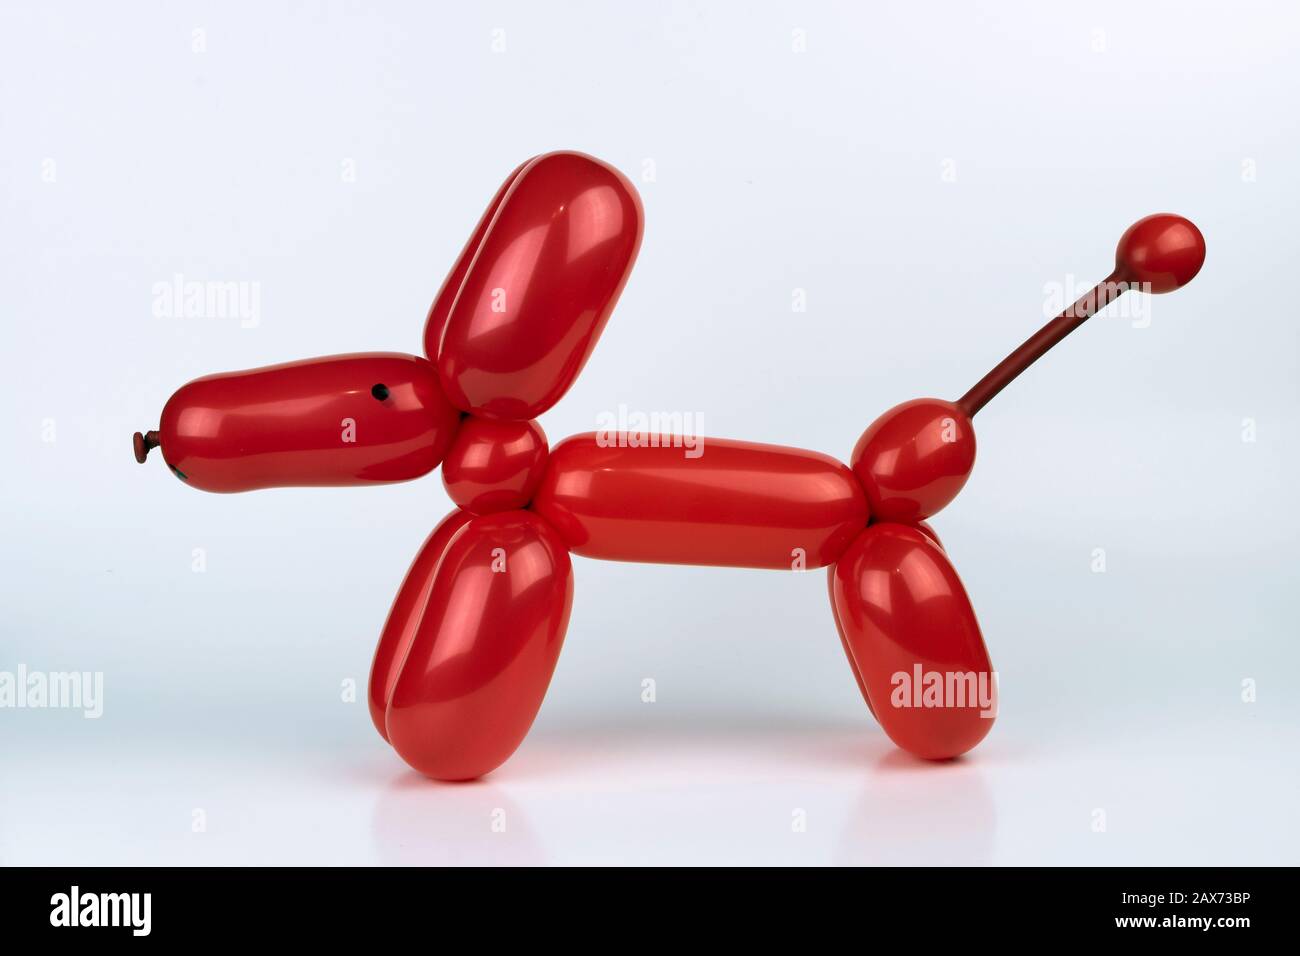 Fun red balloon animal puppy dog made using the art of balloon twisting like a balloon artist would make at a children's birthday party. Stock Photo